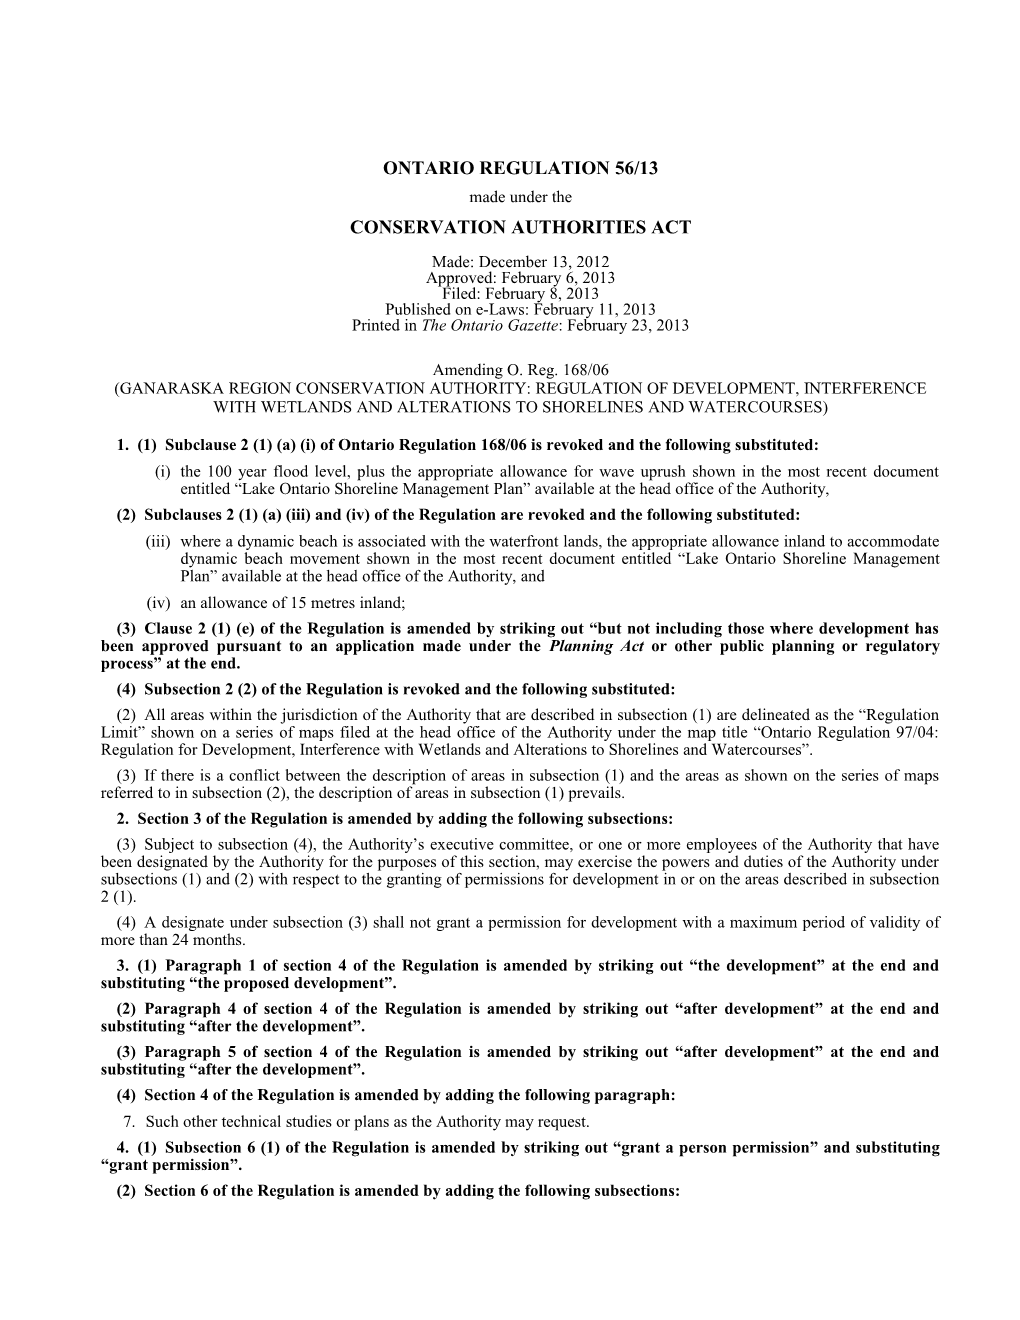 CONSERVATION AUTHORITIES ACT - O. Reg. 56/13